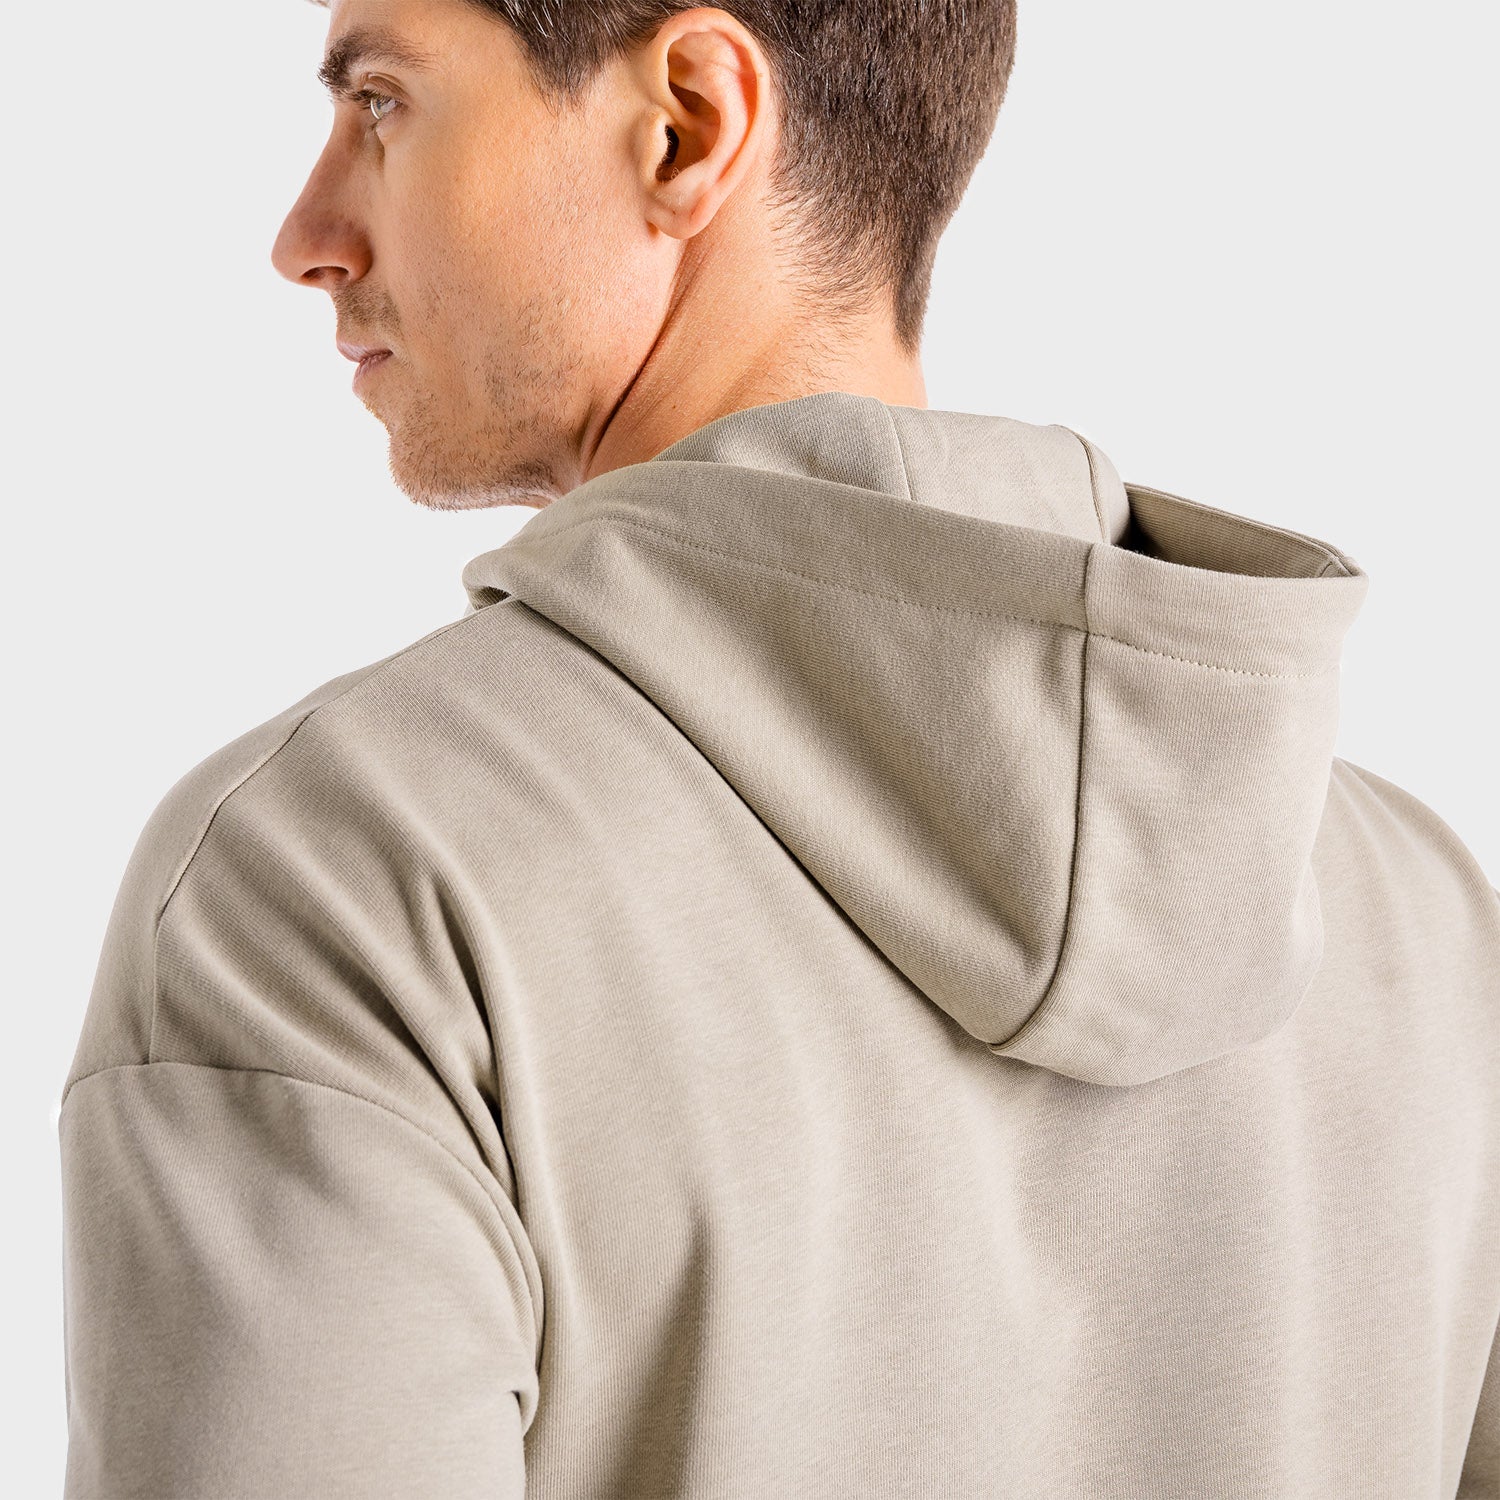 squatwolf-workout-hoodies-for-men-core-zip-up-taupe-gym-wear